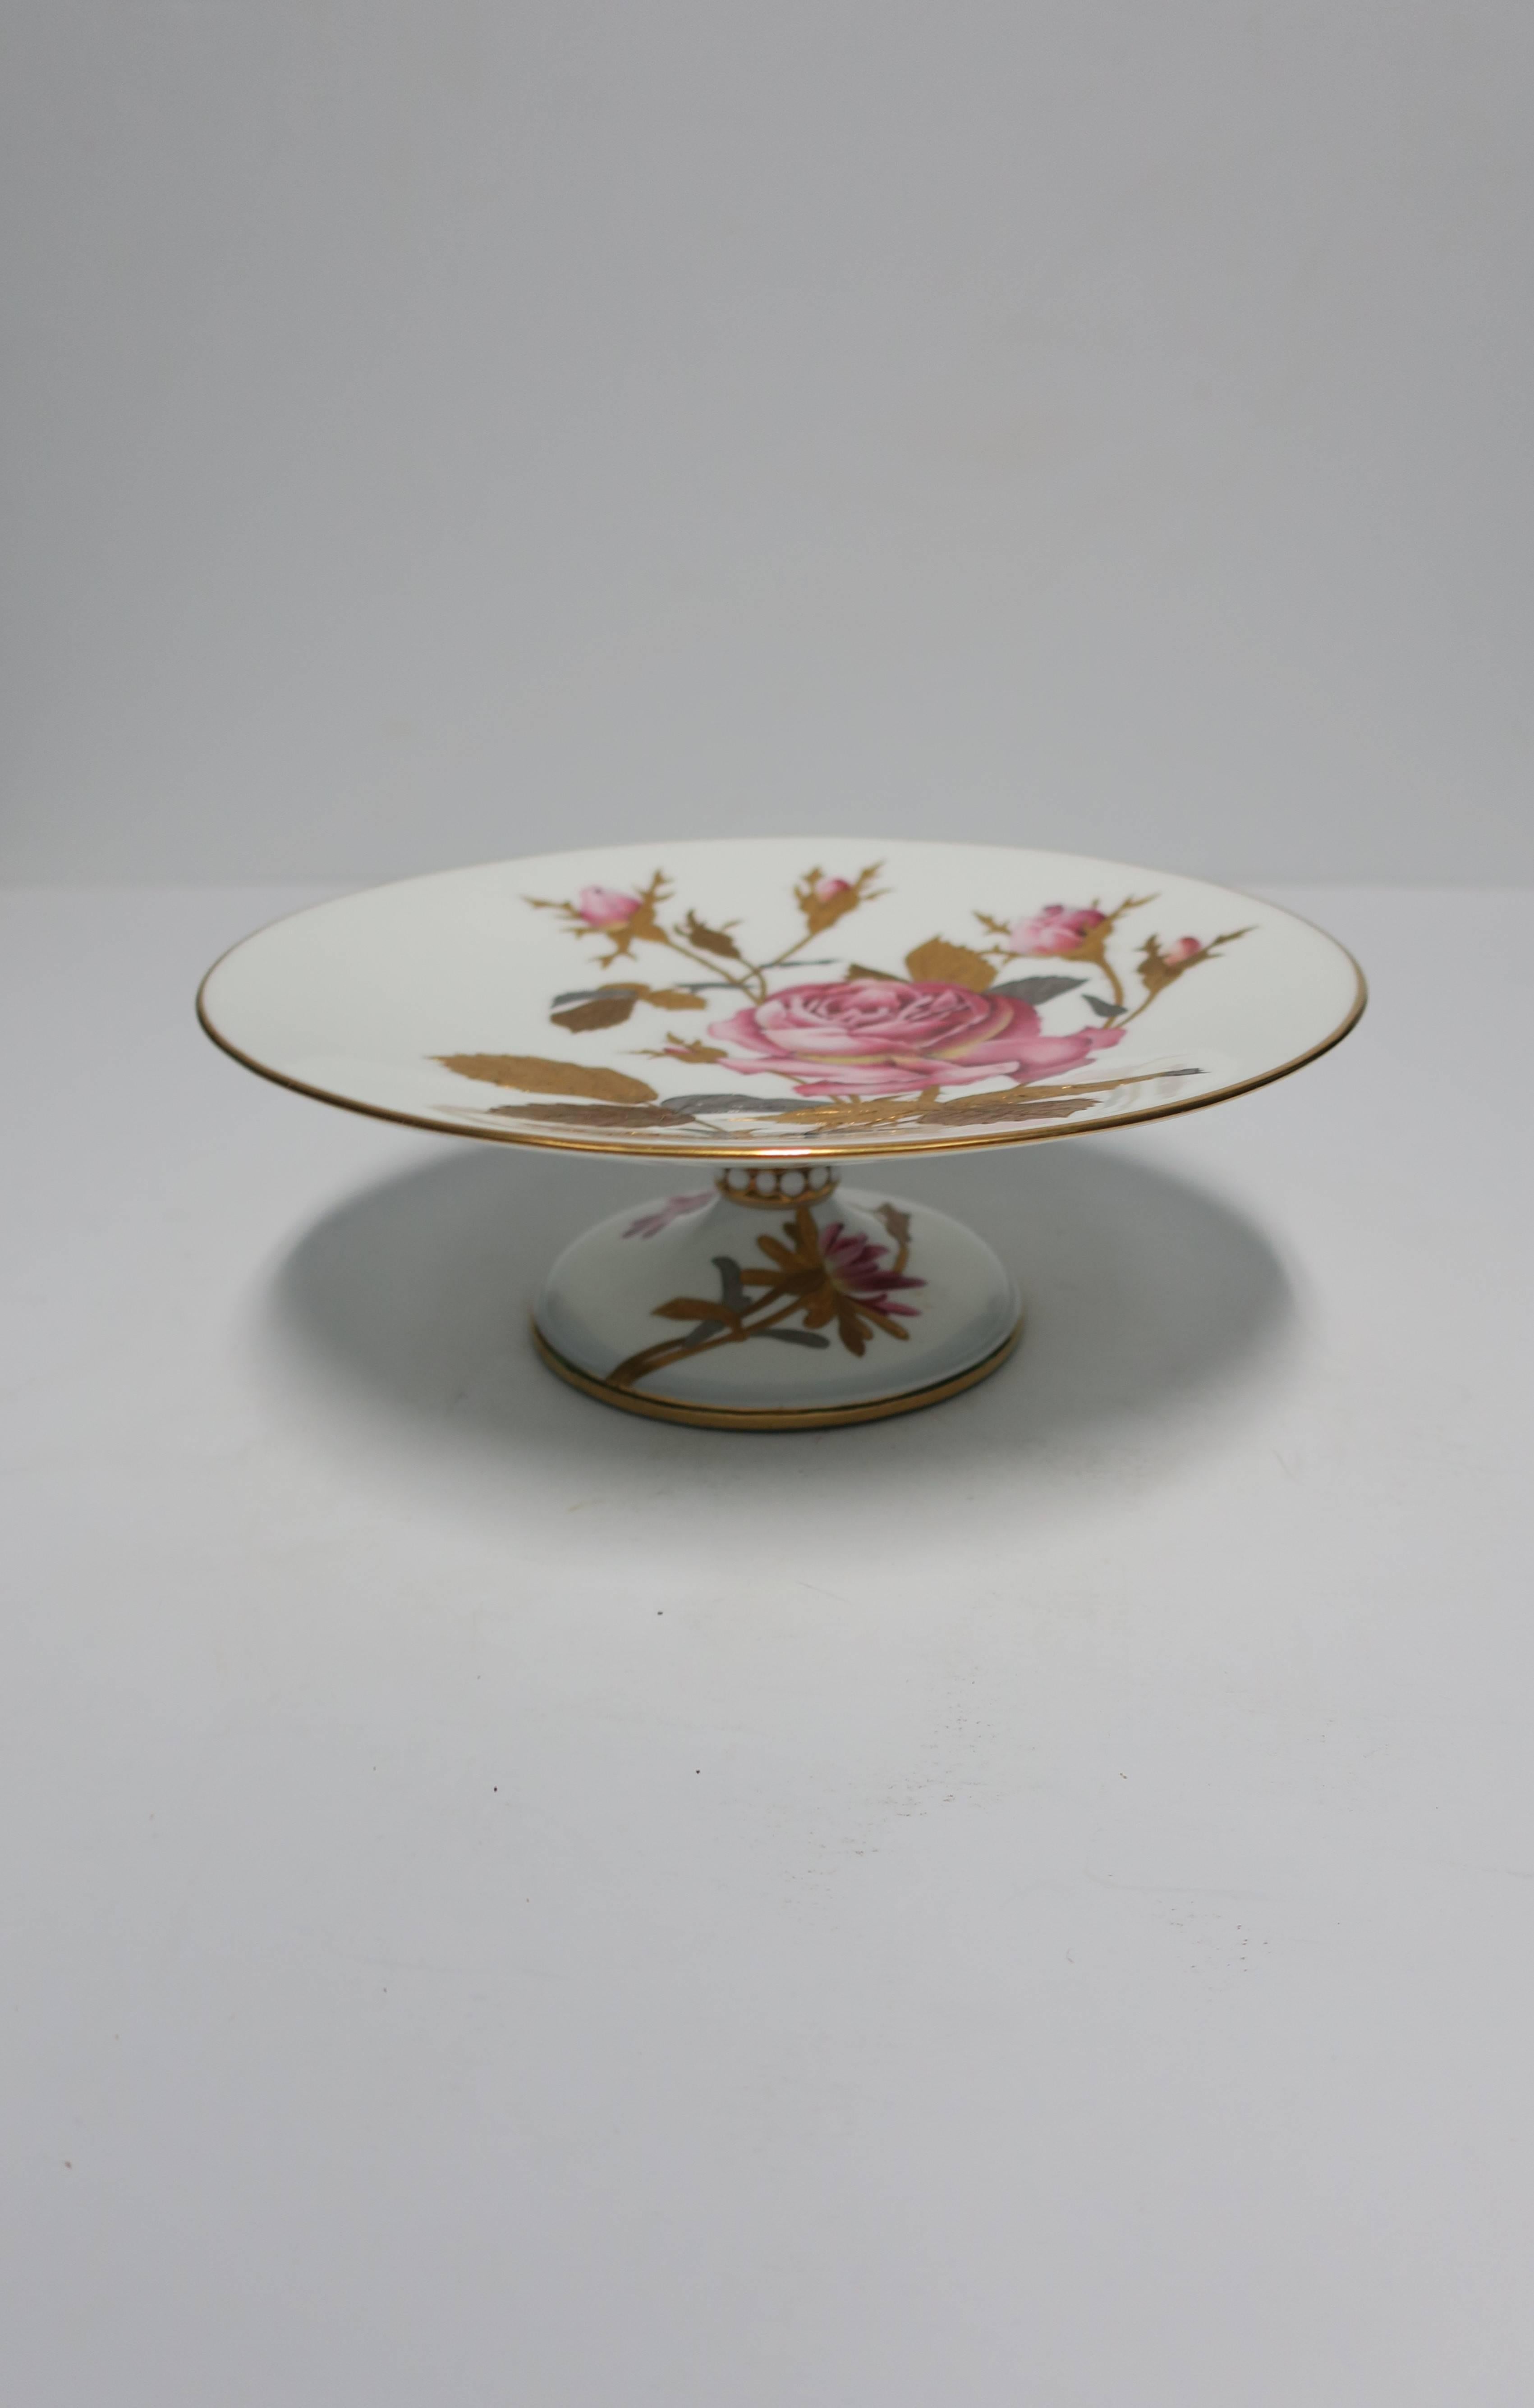 European White Porcelain Pedestal Dessert Plate with Pink Roses and Gold Leaves In Excellent Condition For Sale In New York, NY